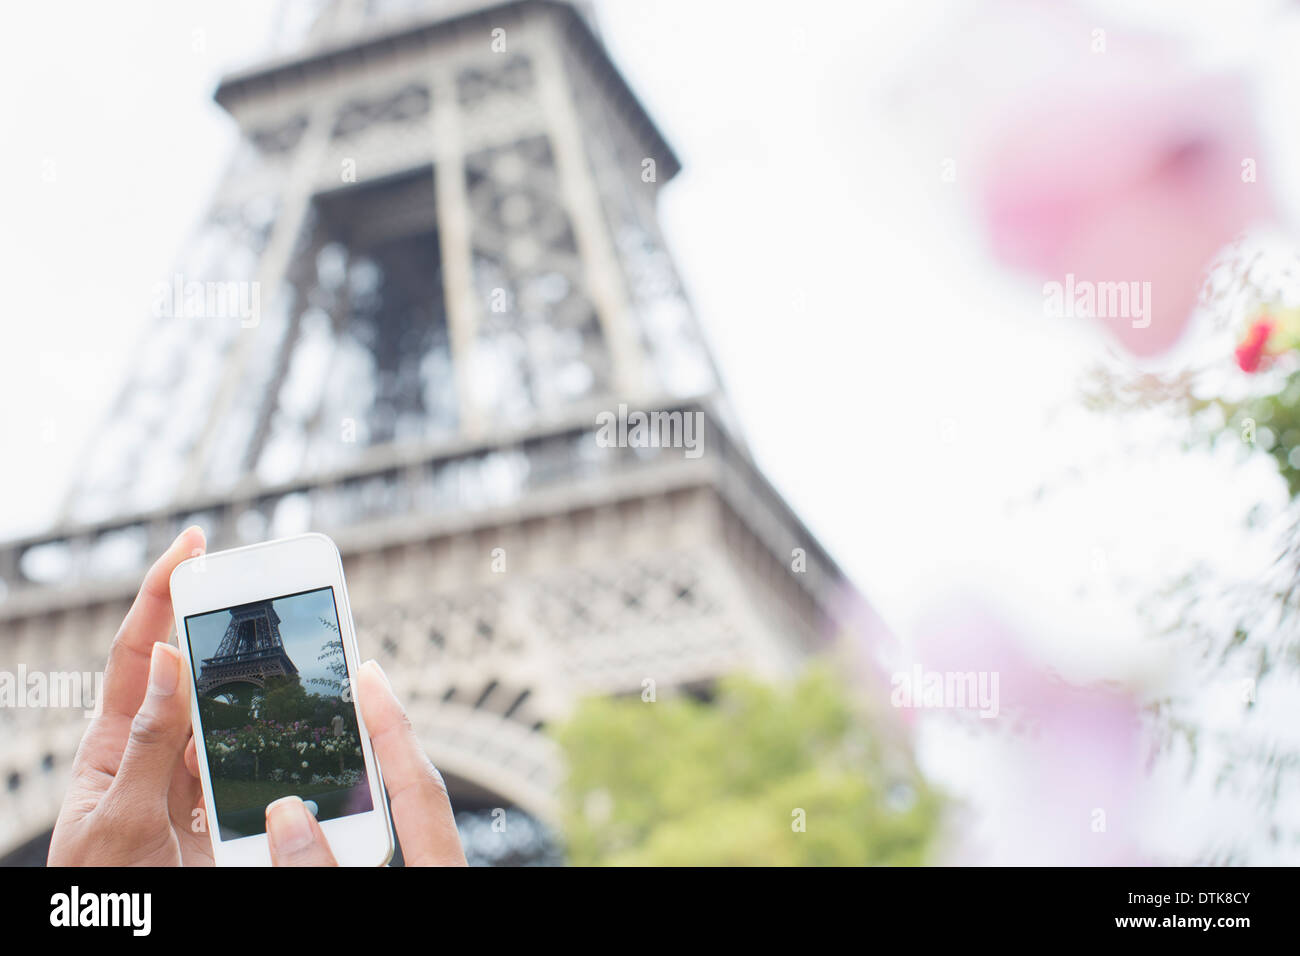 Woman photographing Eiffel Tower with camera phone, Paris, France Stock Photo